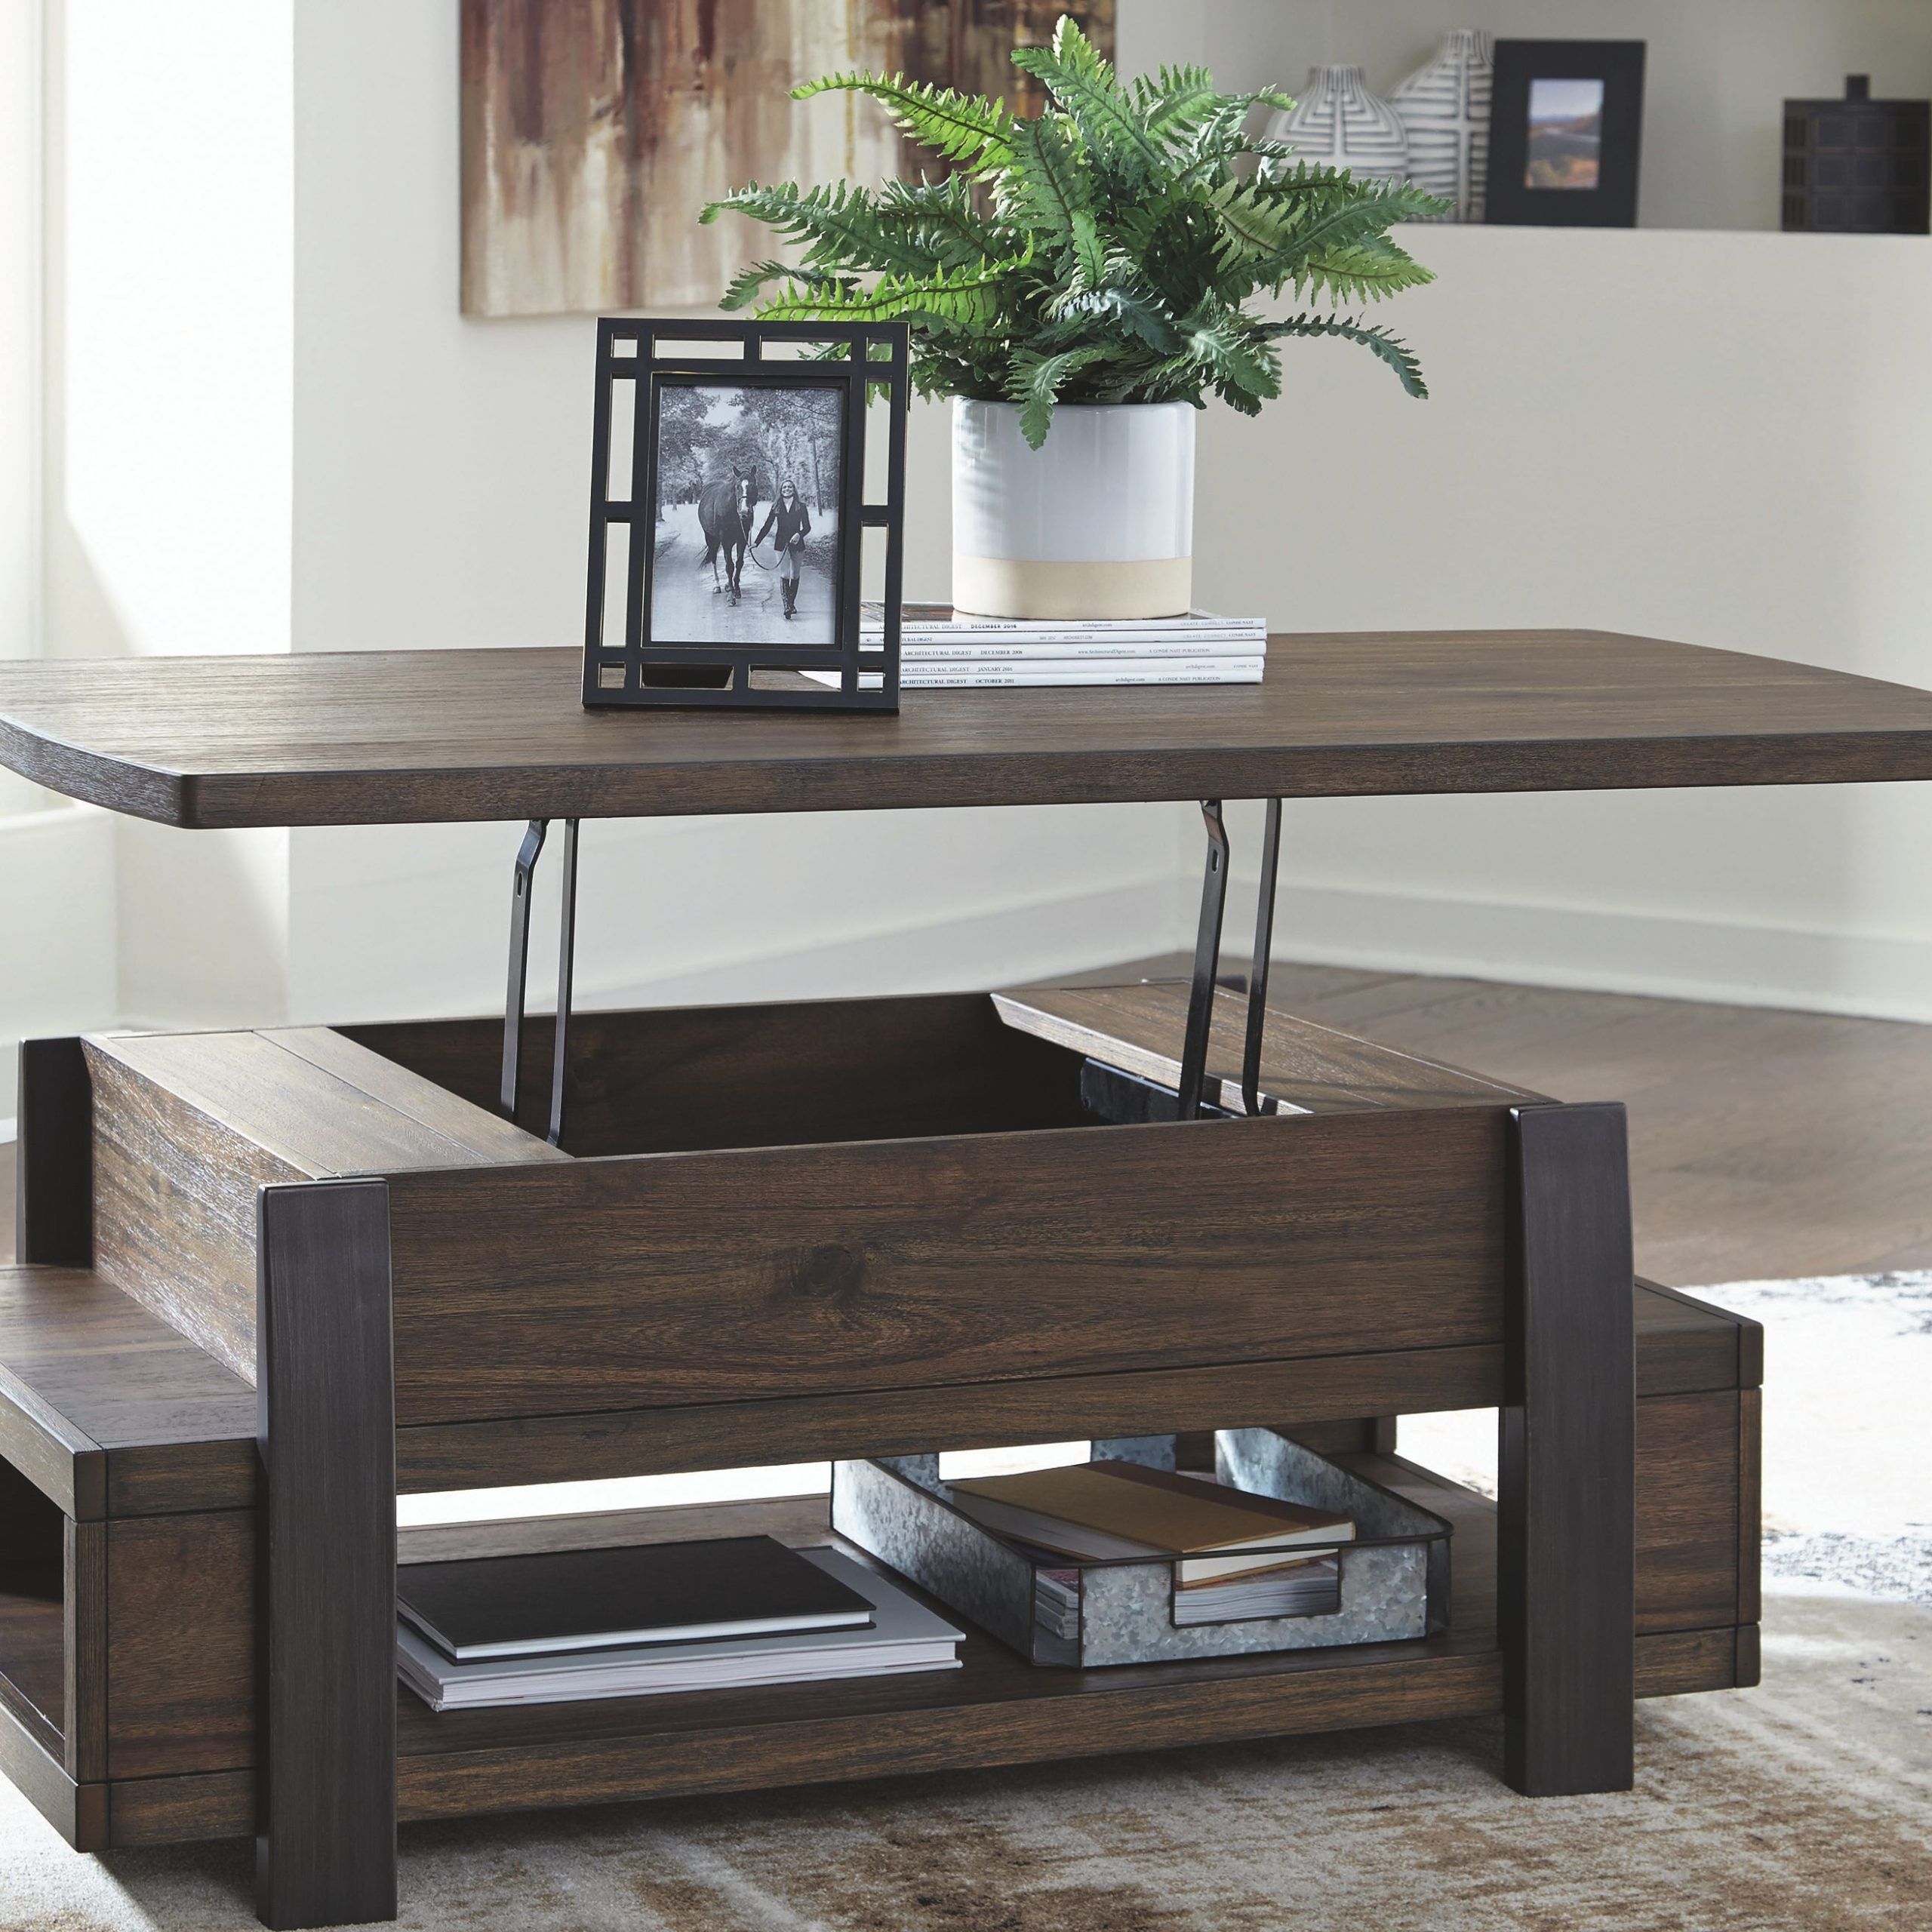 Why The Lift Table Coffee Table Is A Must Have For The Modern Home Regarding Modern Wooden Lift Top Tables (Gallery 6 of 20)